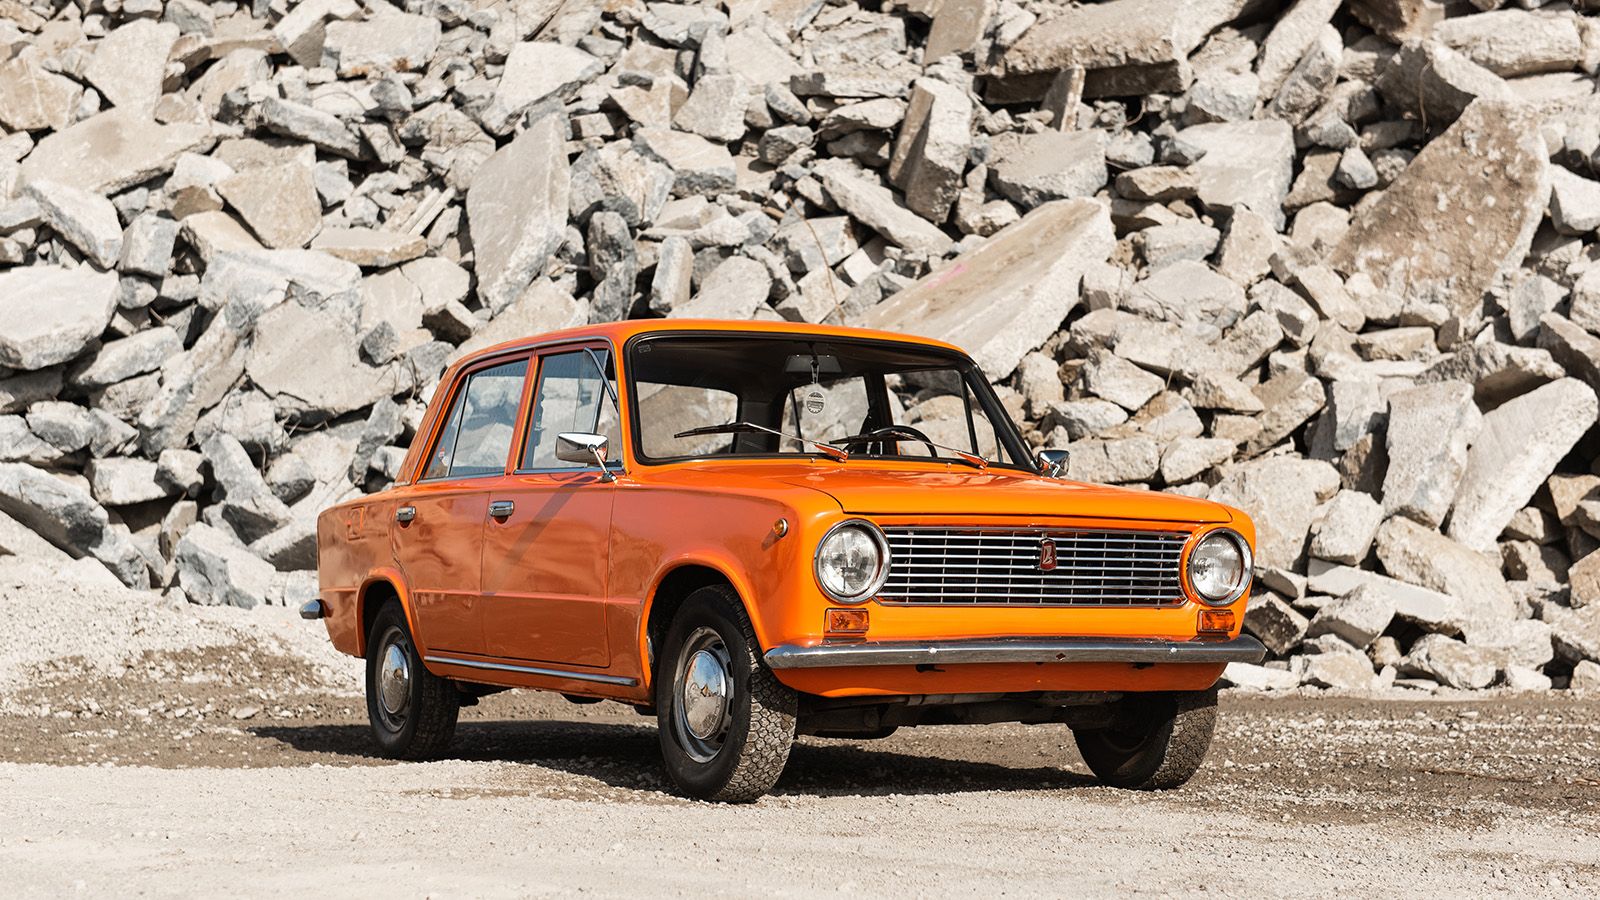 Beyond doubt warrant loom 1976 Lada 2101: Here's what it's like to own